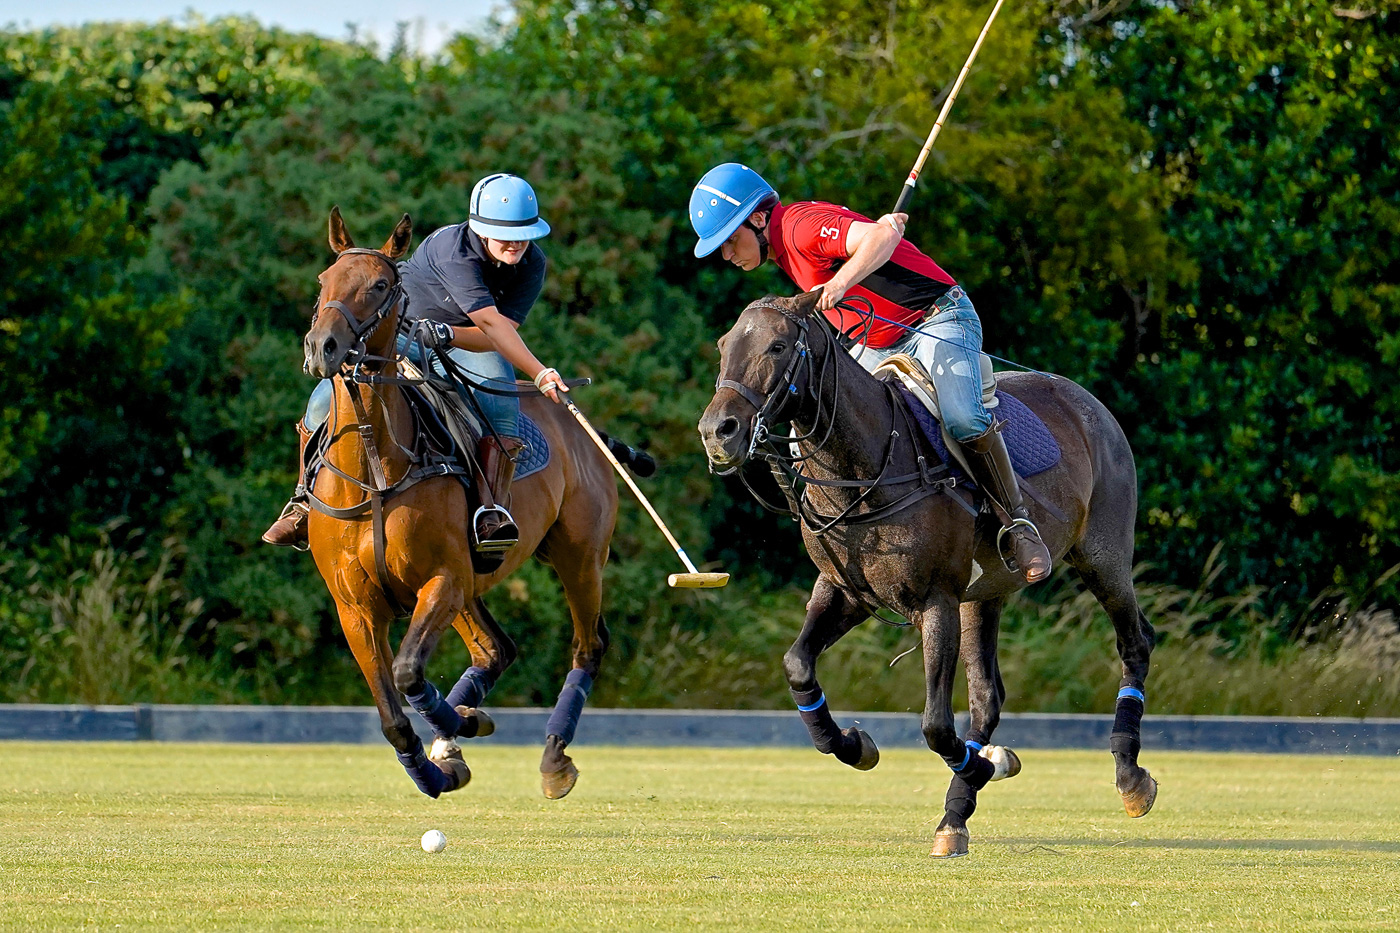 Learn to Play Polo